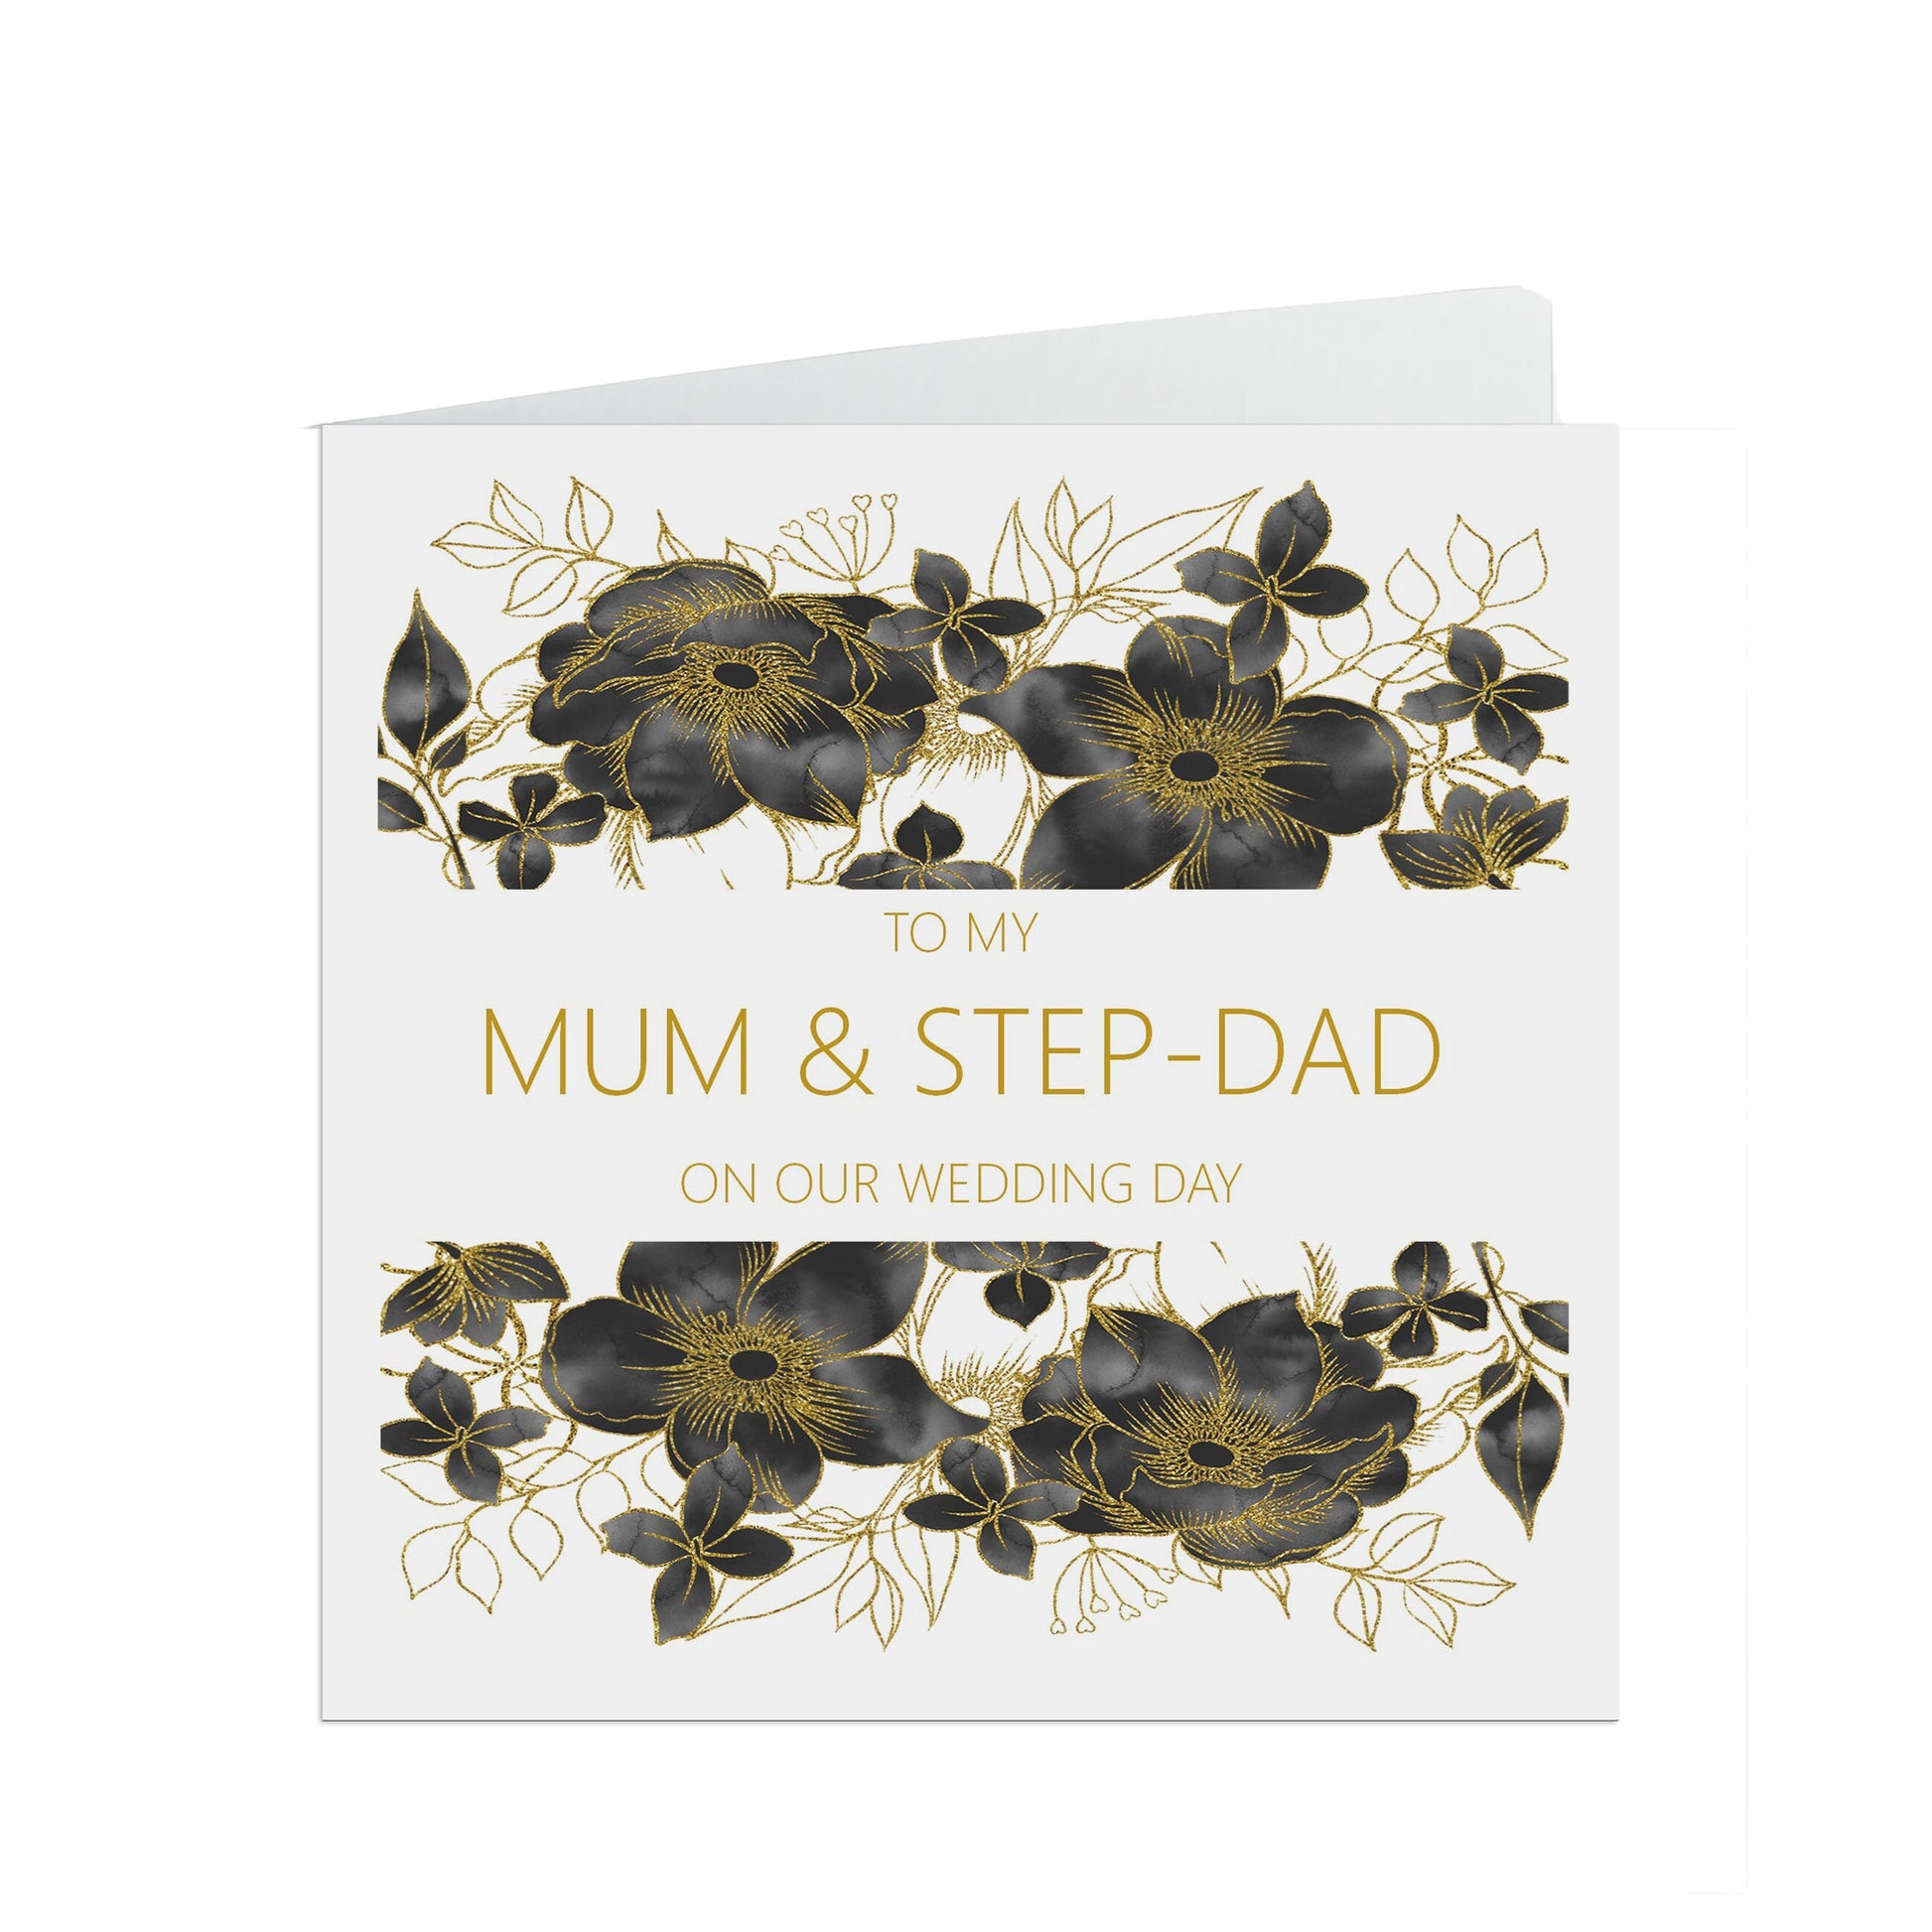 Mum And Step-Dad On Our Wedding Day Card, Black & Gold Floral 6x6 Inches With A White Envelope